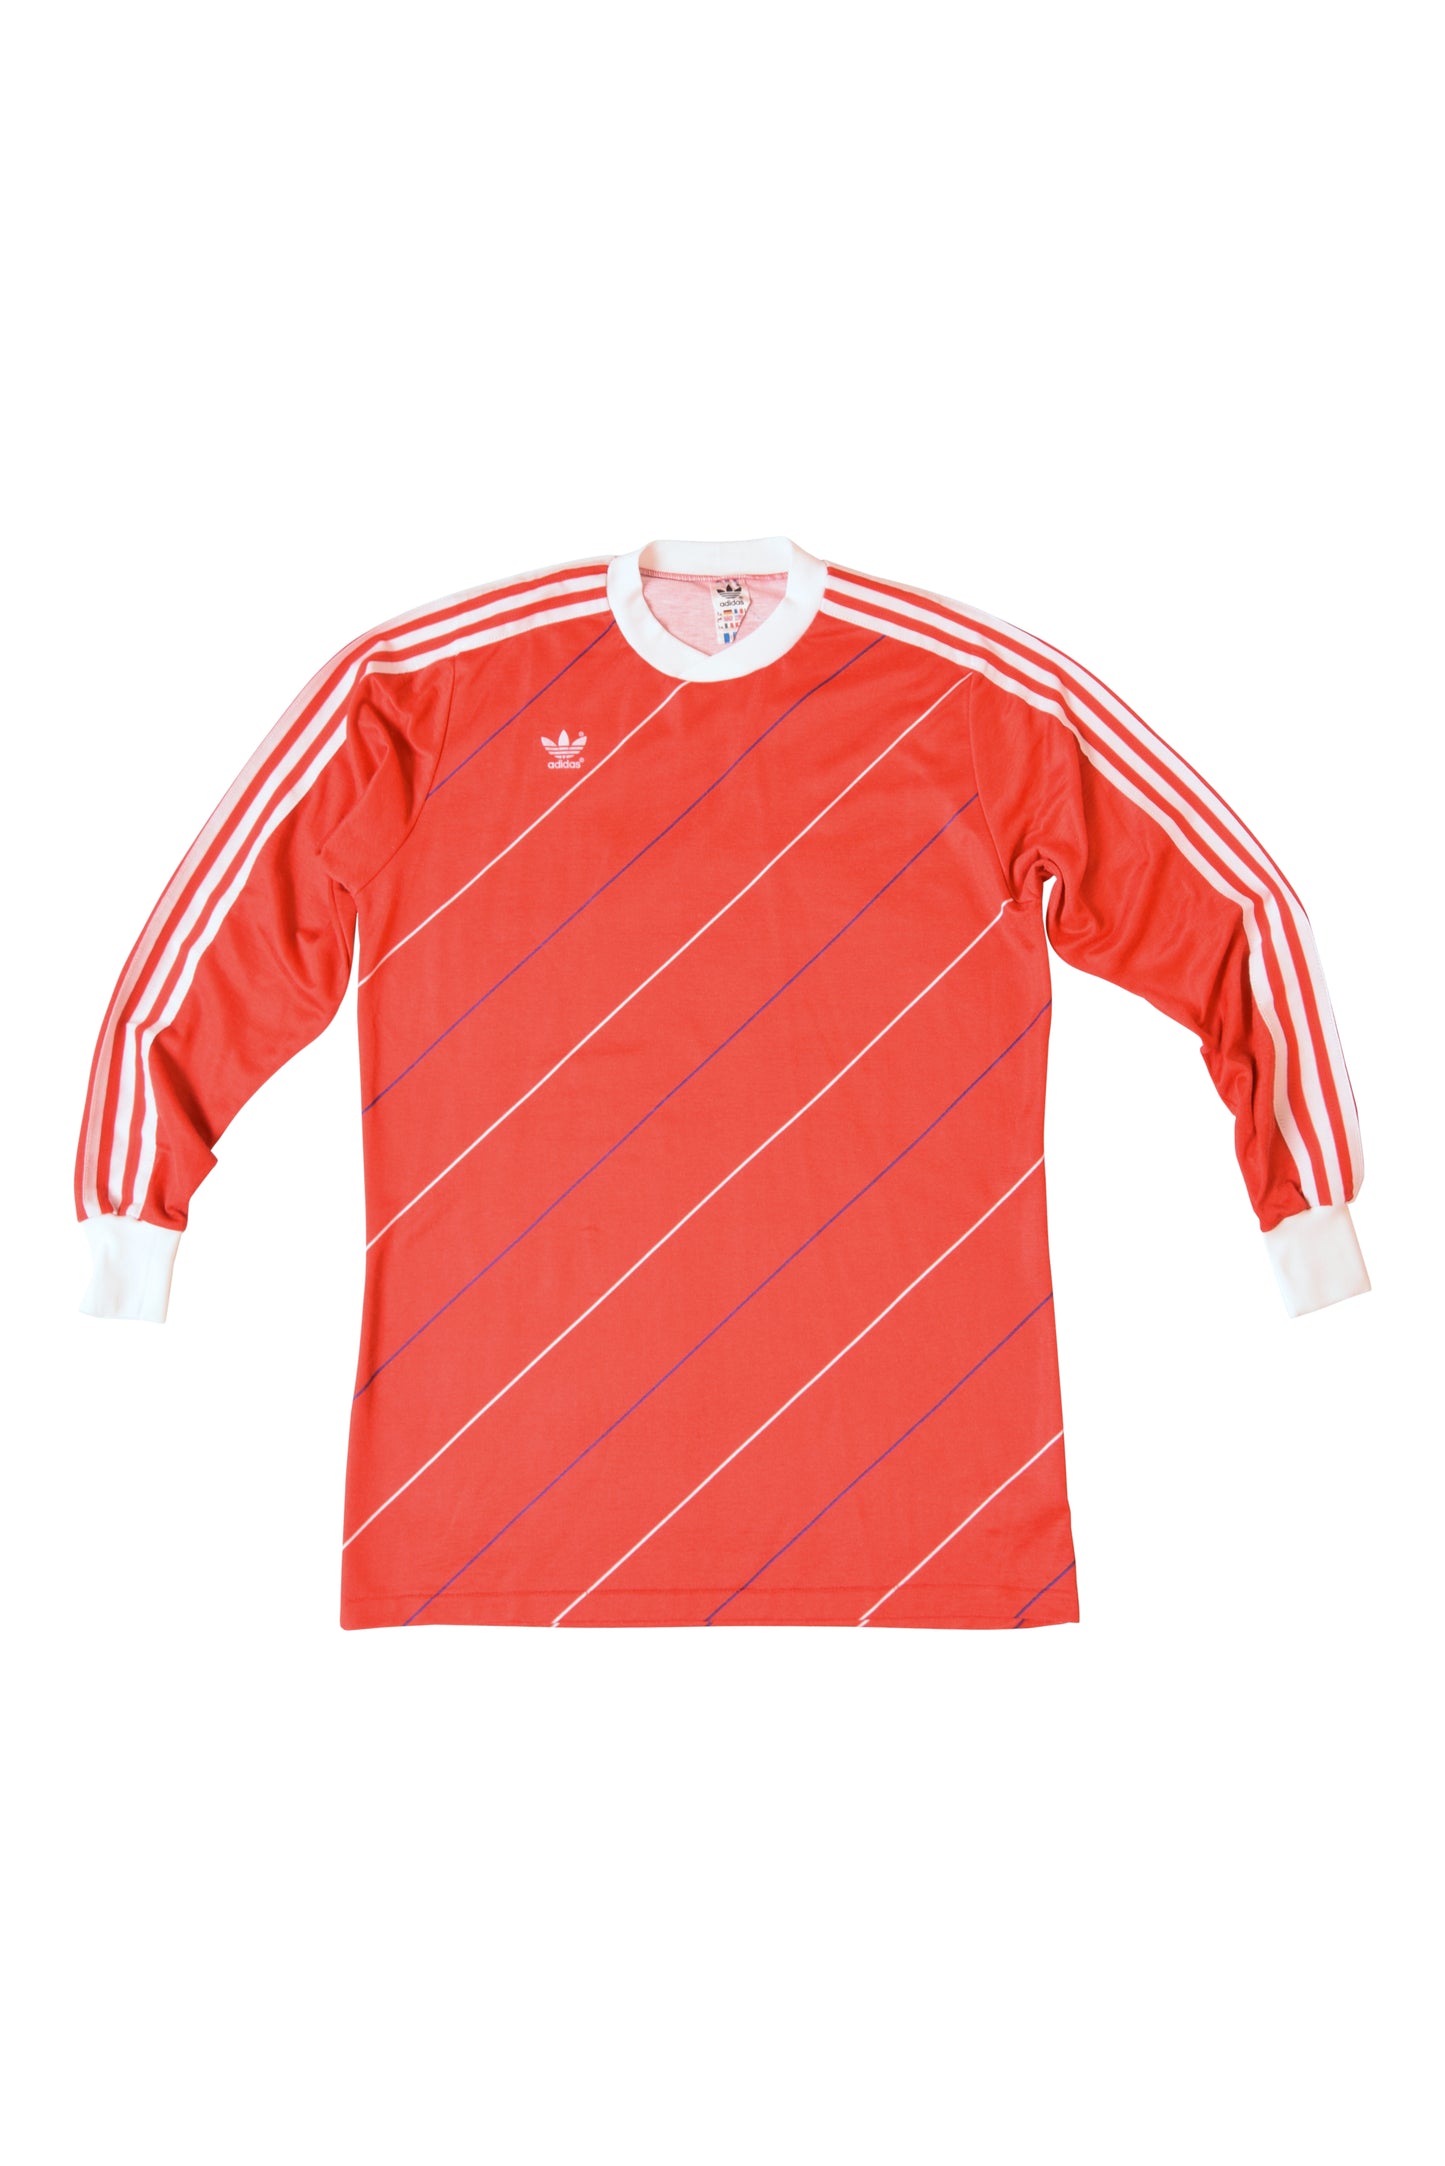 Vintage Adidas 80's Made in West Germany Bayern Munich Template 1984-1989